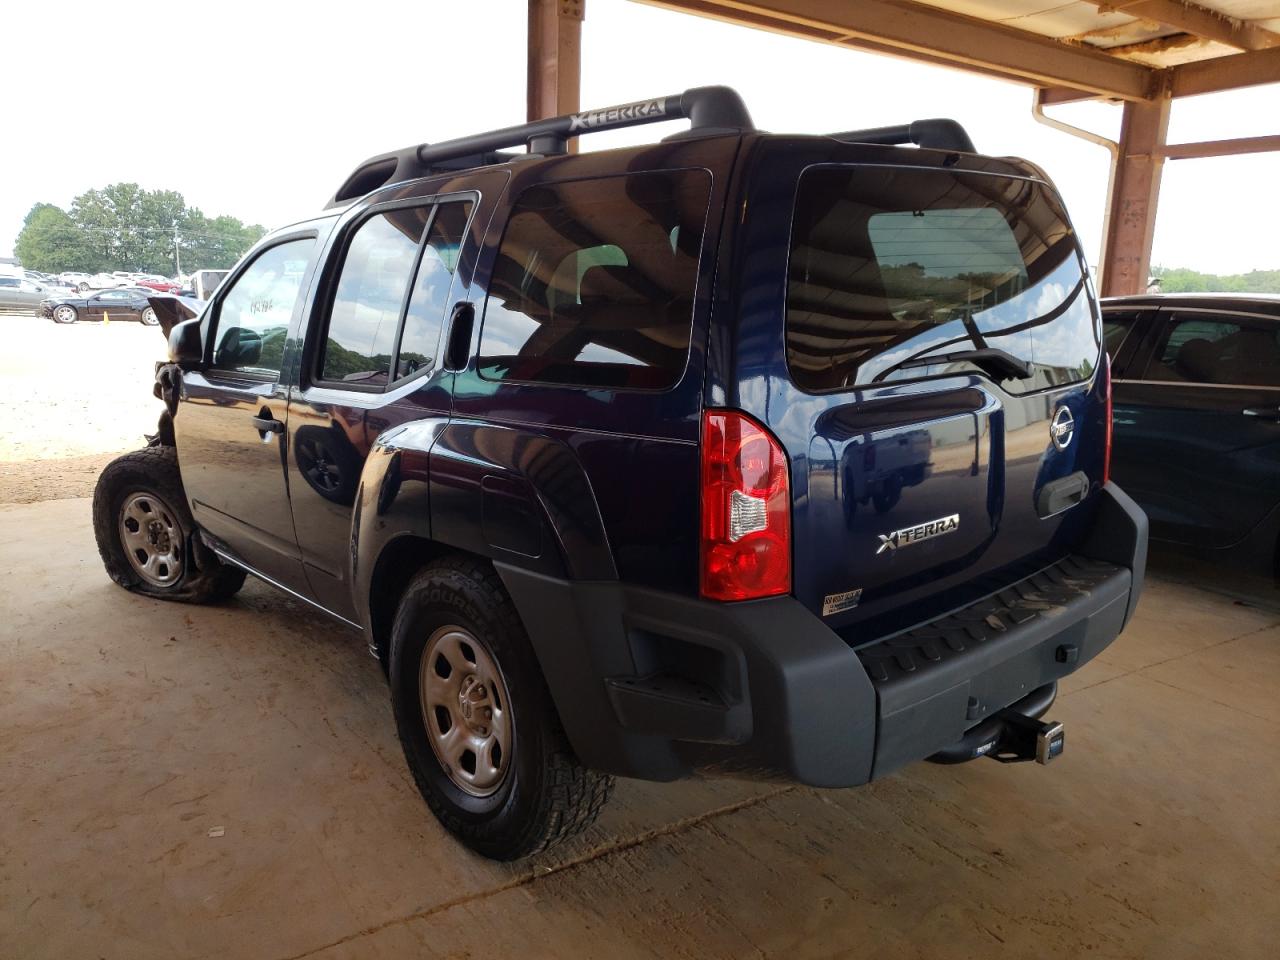 5N1AN08U17C****** Salvage and Repairable 2007 Nissan Xterra in AL - Tanner